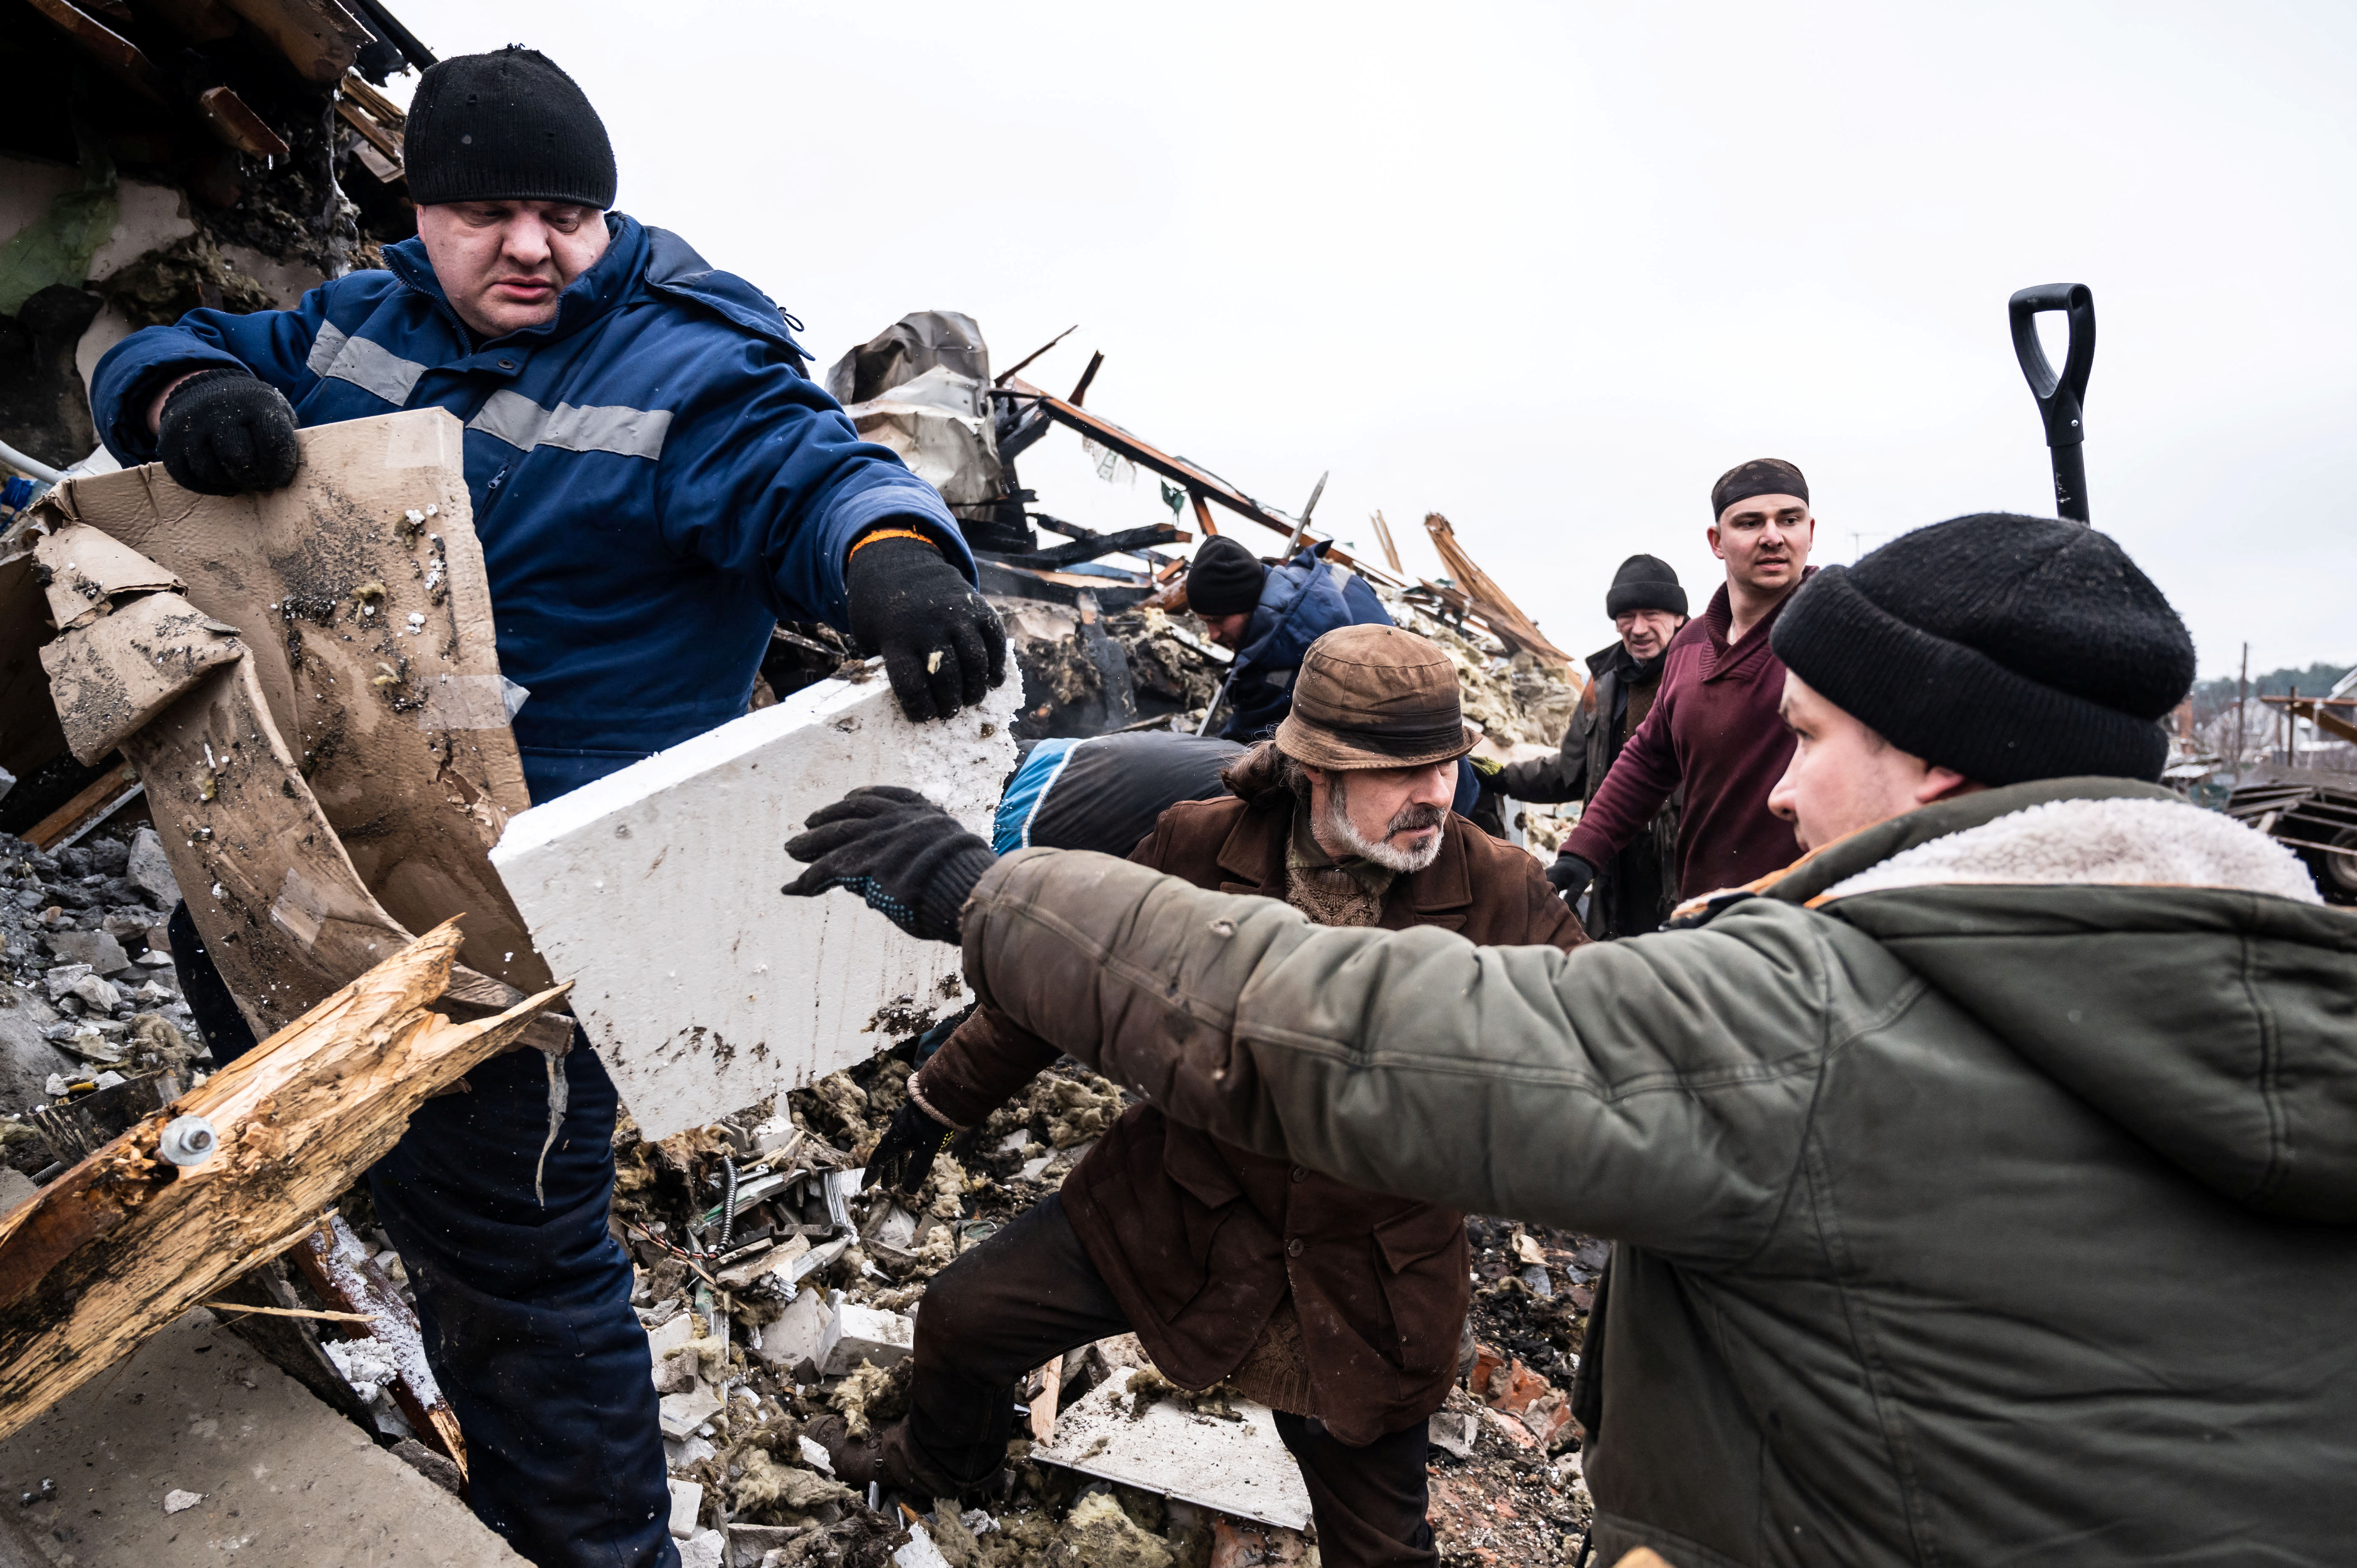 Local residents remove debris of a residential building destroyed by shelling, as Russia's invasion of Ukraine continues, in Zhytomyr